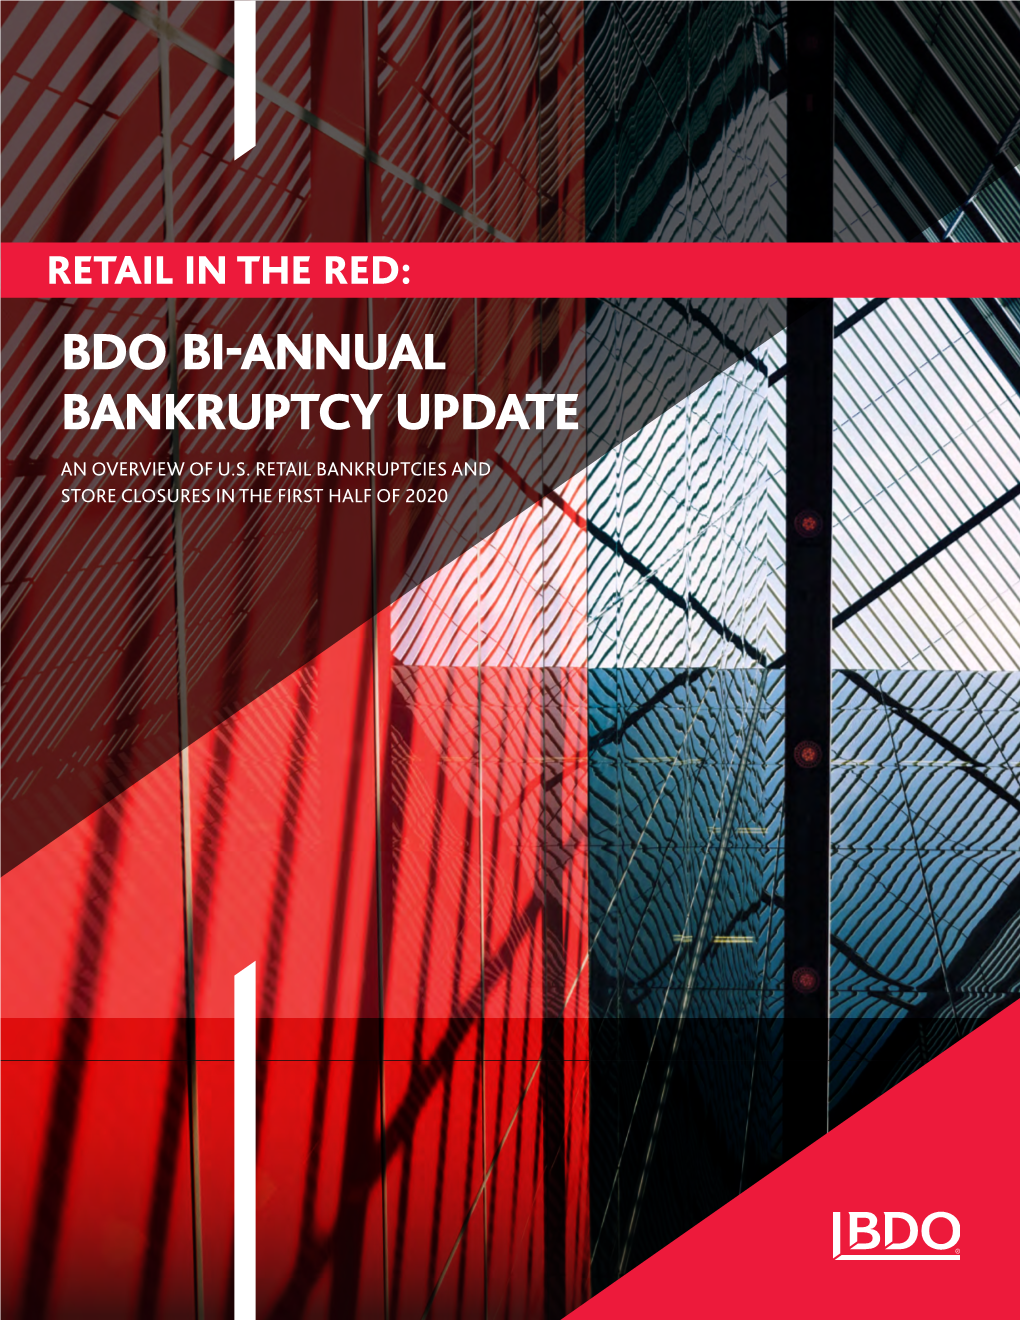 Bdo Bi-Annual Bankruptcy Update an Overview of U.S